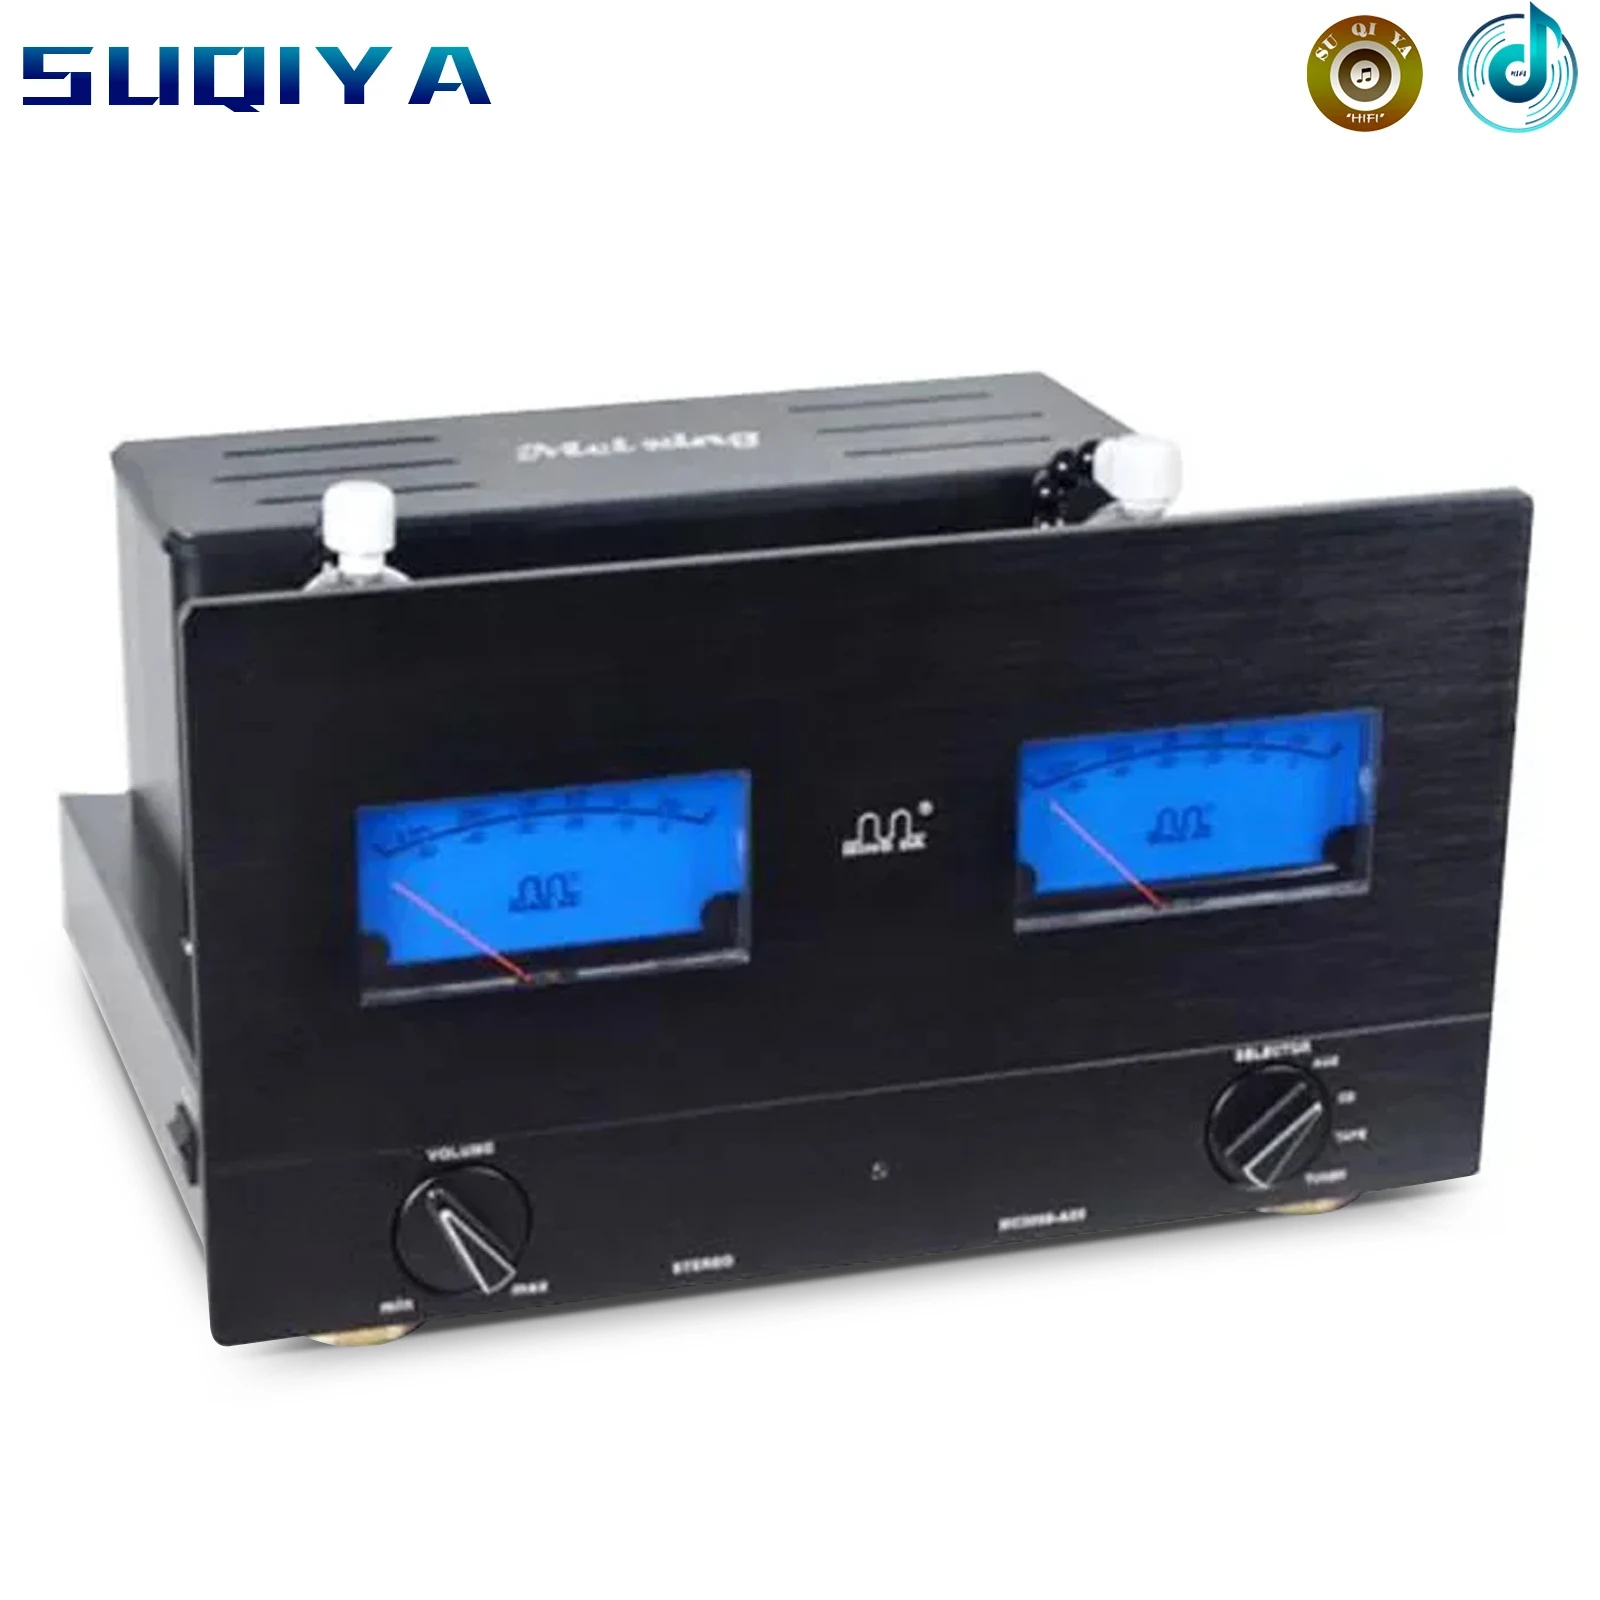 

Meixing Mingda MC3008-A05 Vacuum Tube Amplifier HIFI EXQUIS 300B Push 805 Class A Power Amplifier With Remote Control And Cover